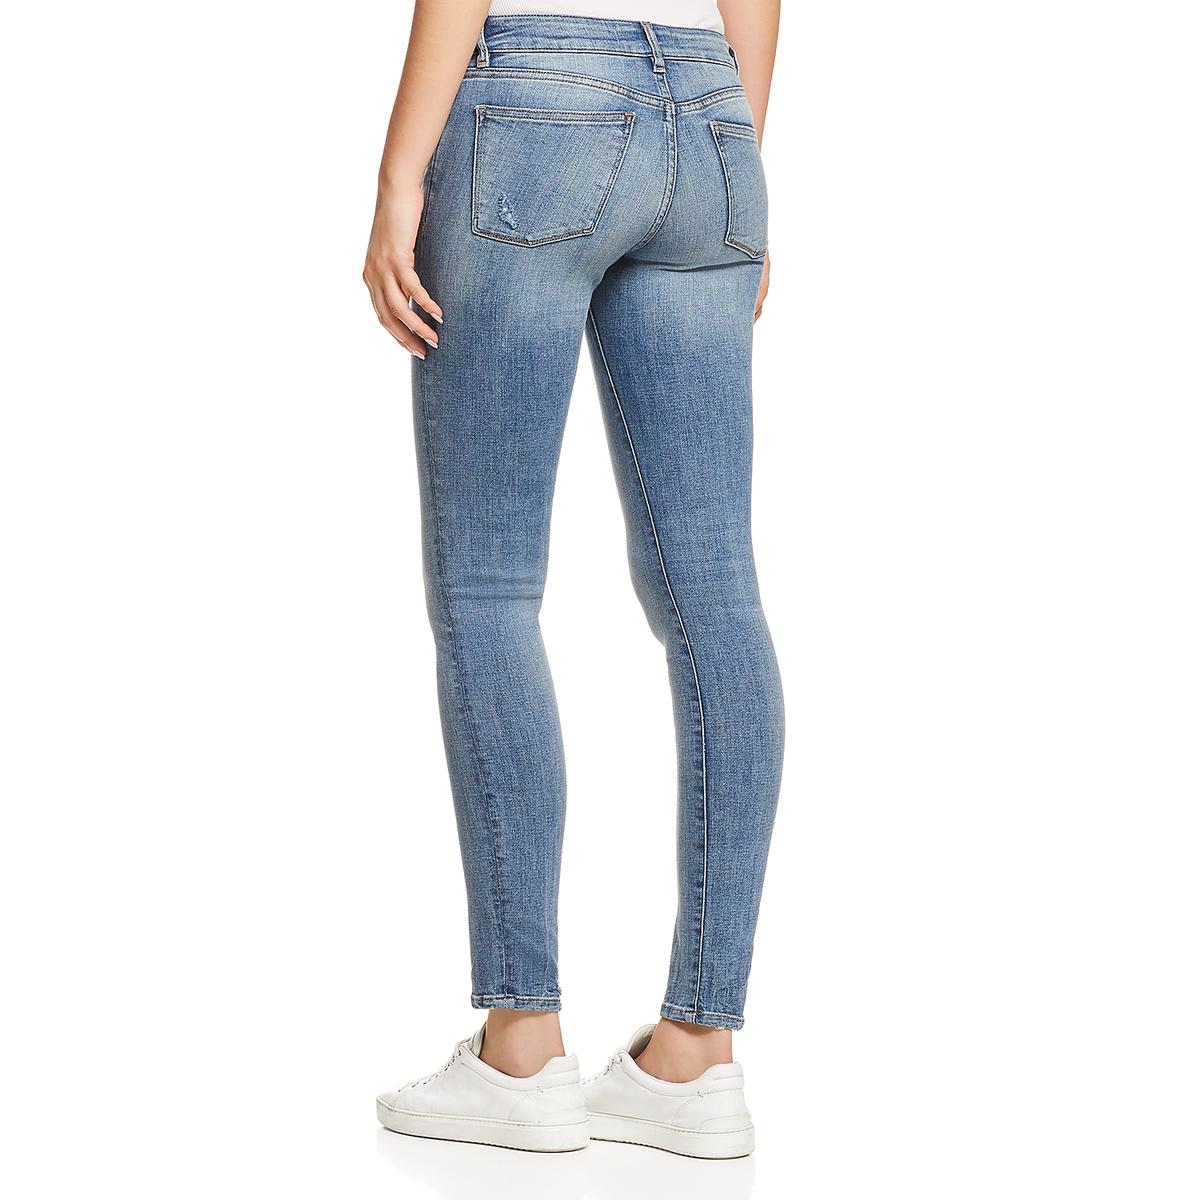 DL1961 Womens Florence Blue Mid-Rise Ripped Denim Skinny Jeans 30 BHFO ...